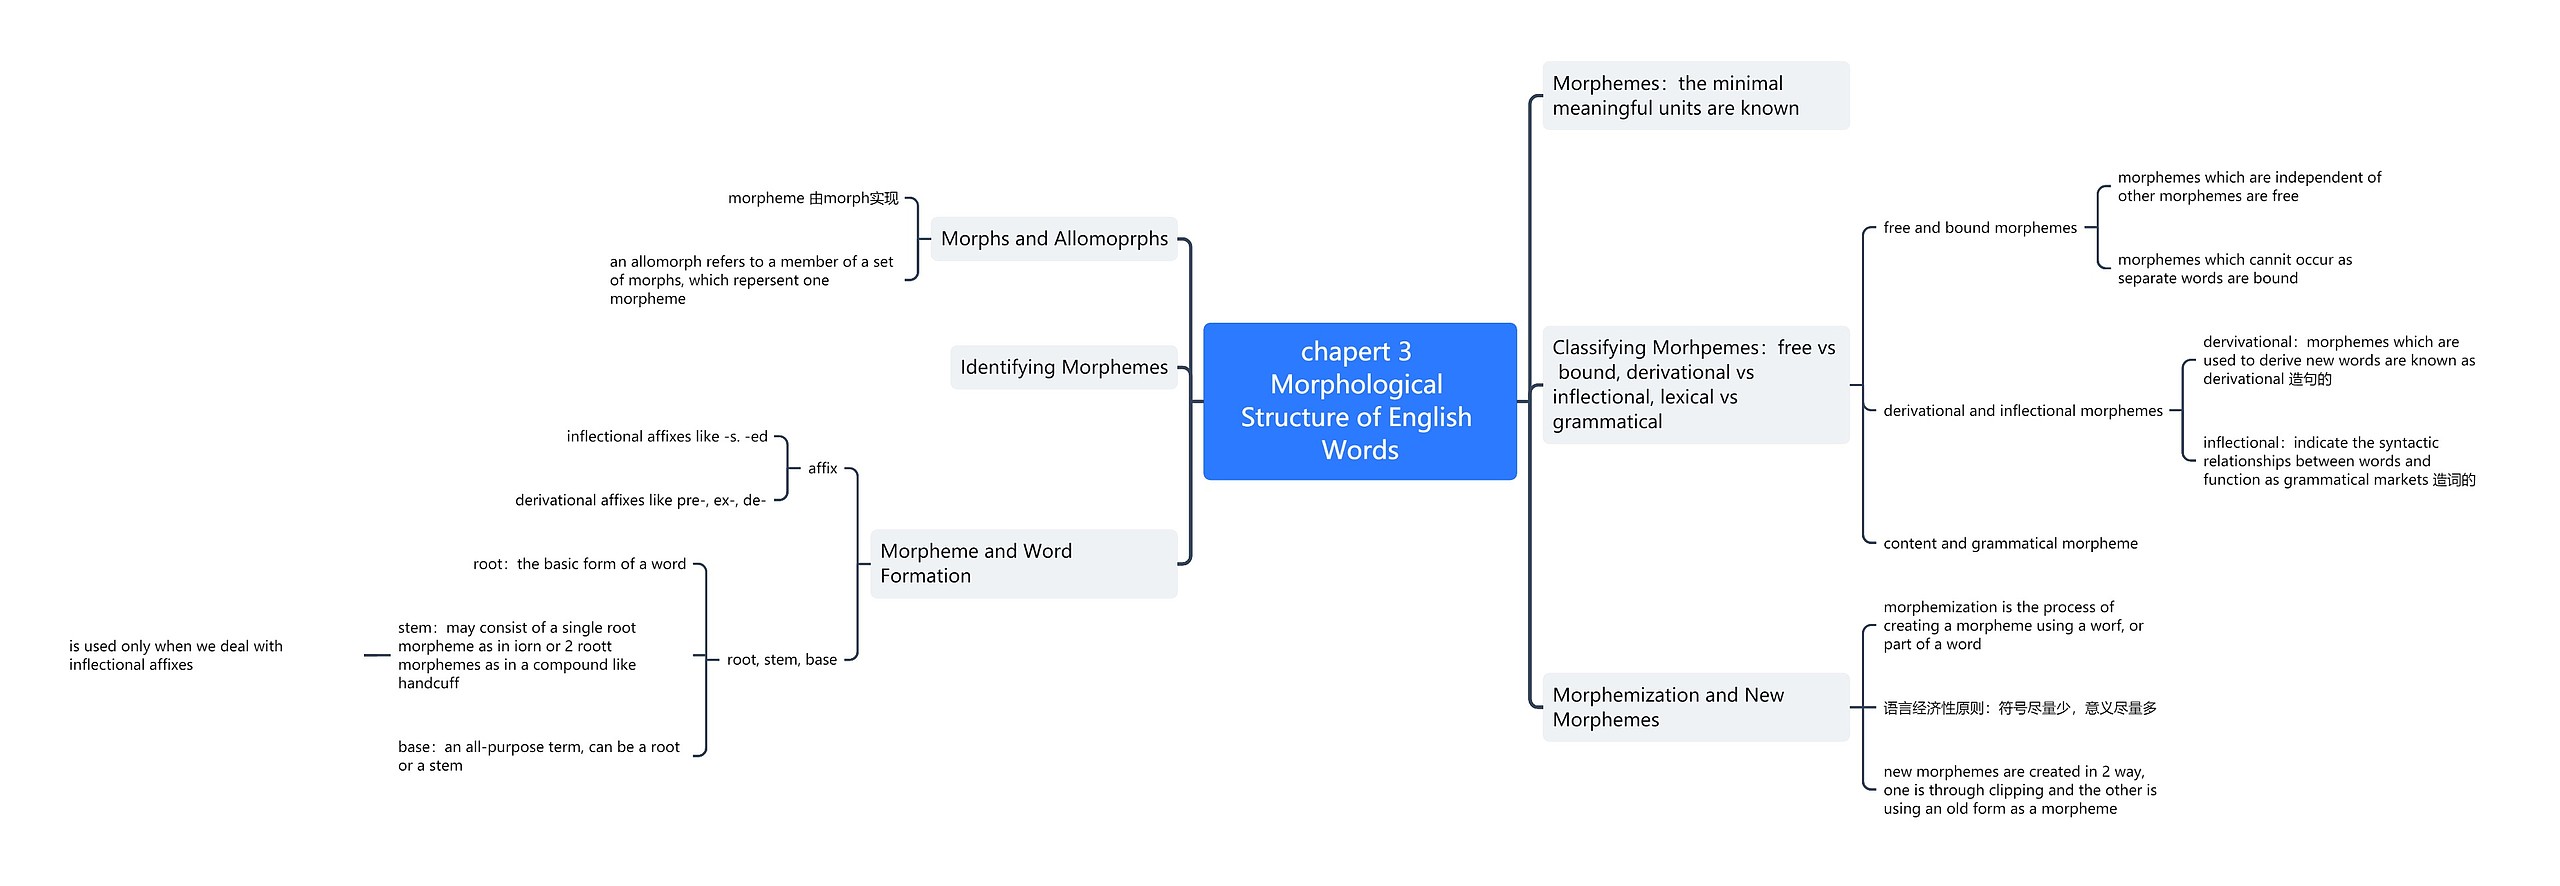 chapert 3 Morphological Structure of English Words